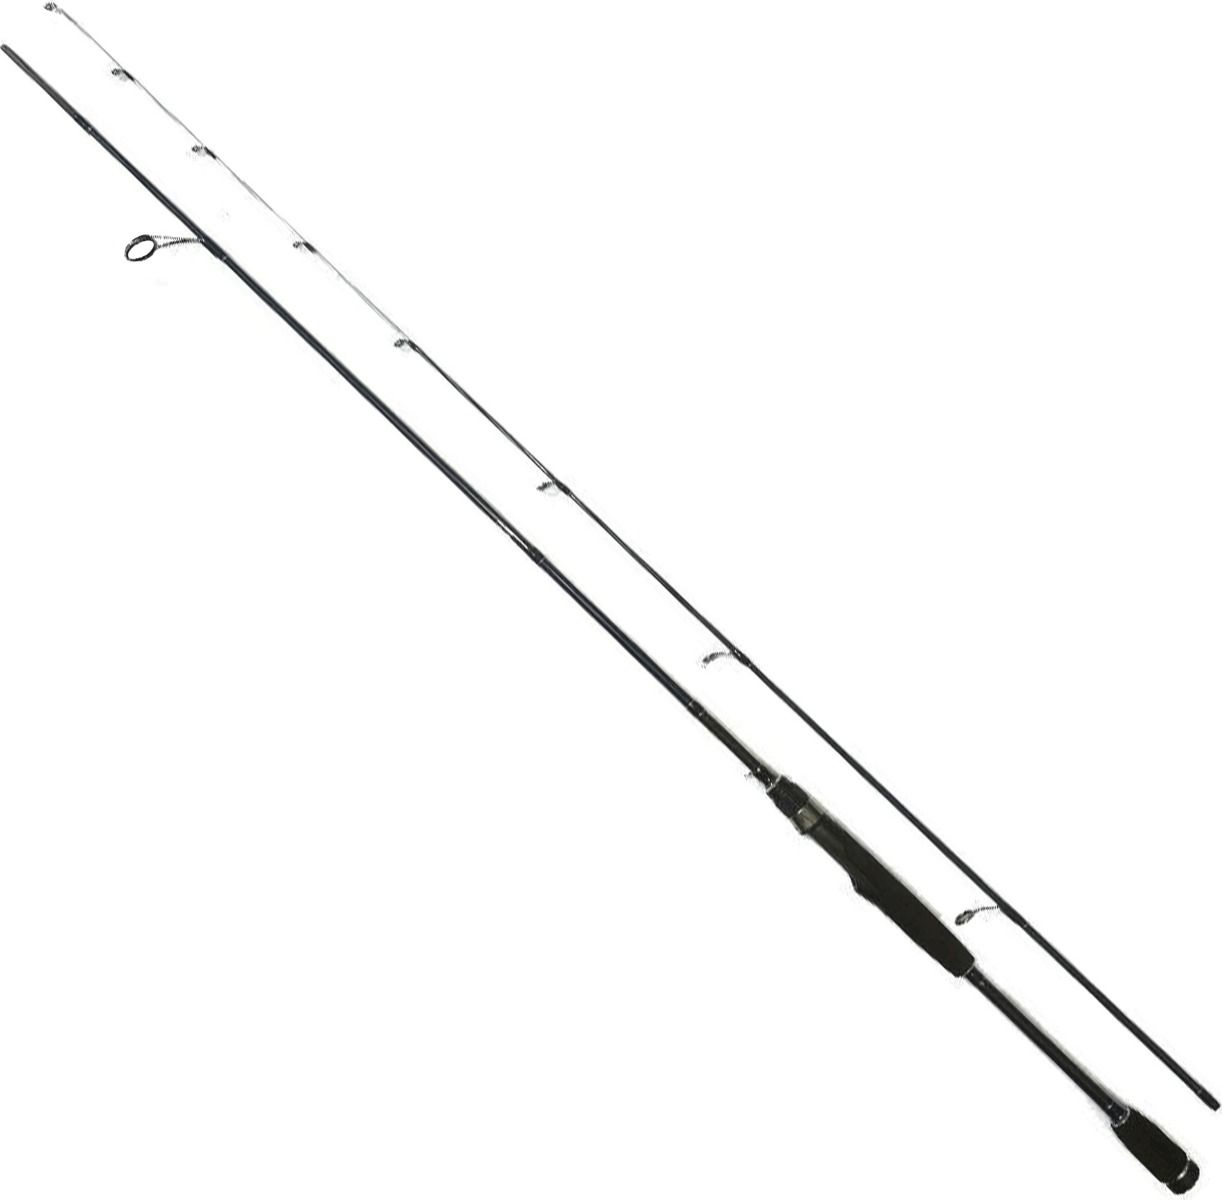 https://www.total-fishing-tackle.com/media/catalog/product/cache/c4fc4656f1ace5fcc9cefe1458e45406/s/h/shakespeare-xt-lrf-rod-1.jpg